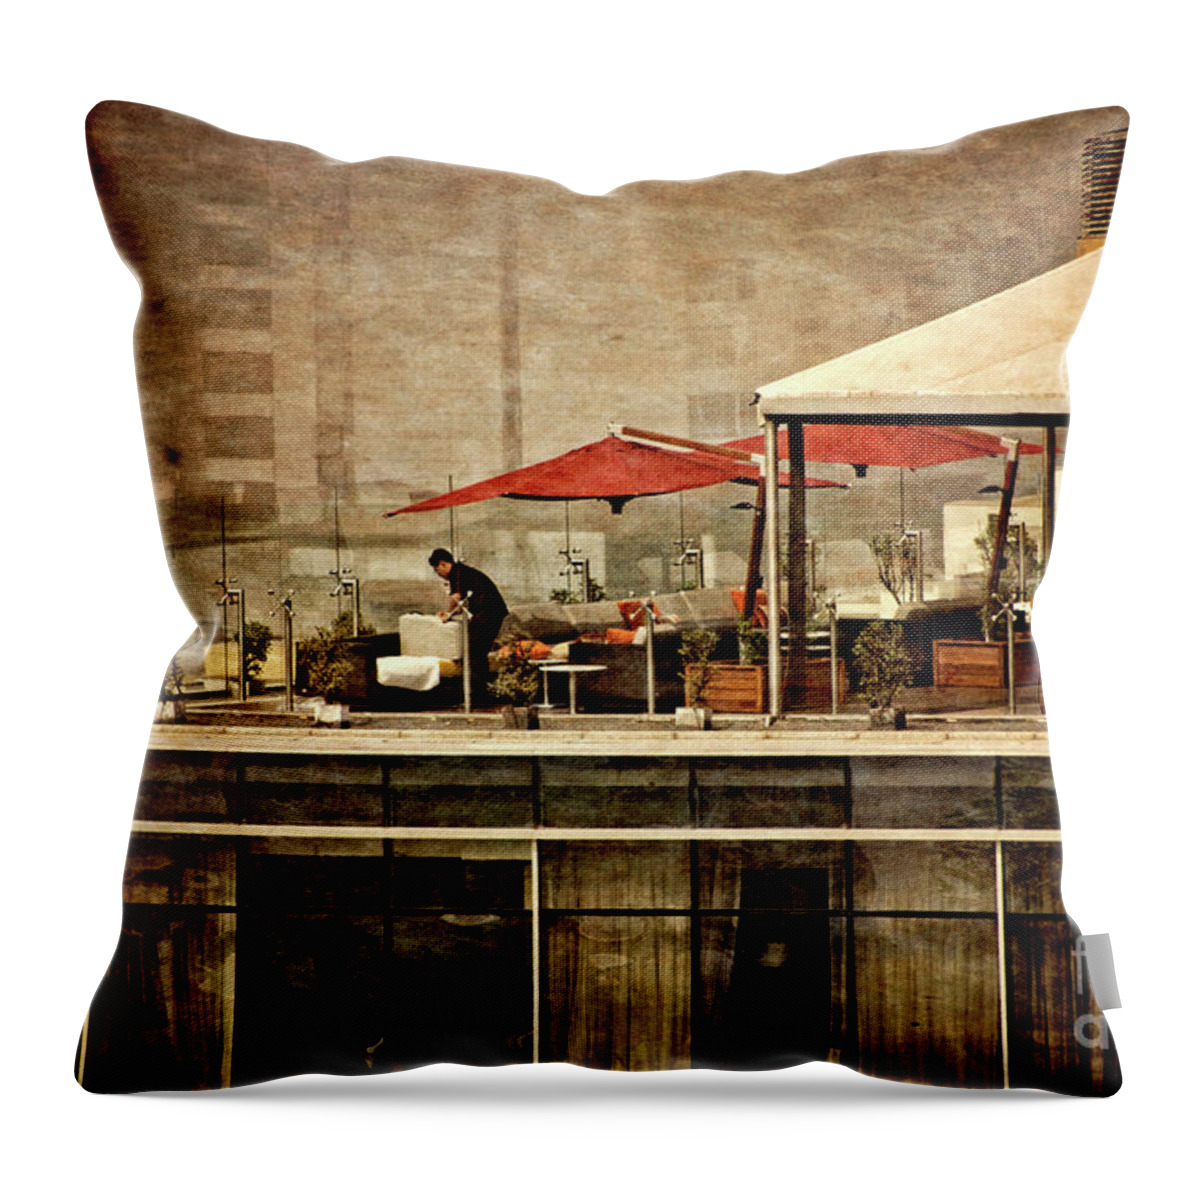 Up On The Roof Throw Pillow featuring the photograph Up on The Roof - Miraflores Peru by Mary Machare